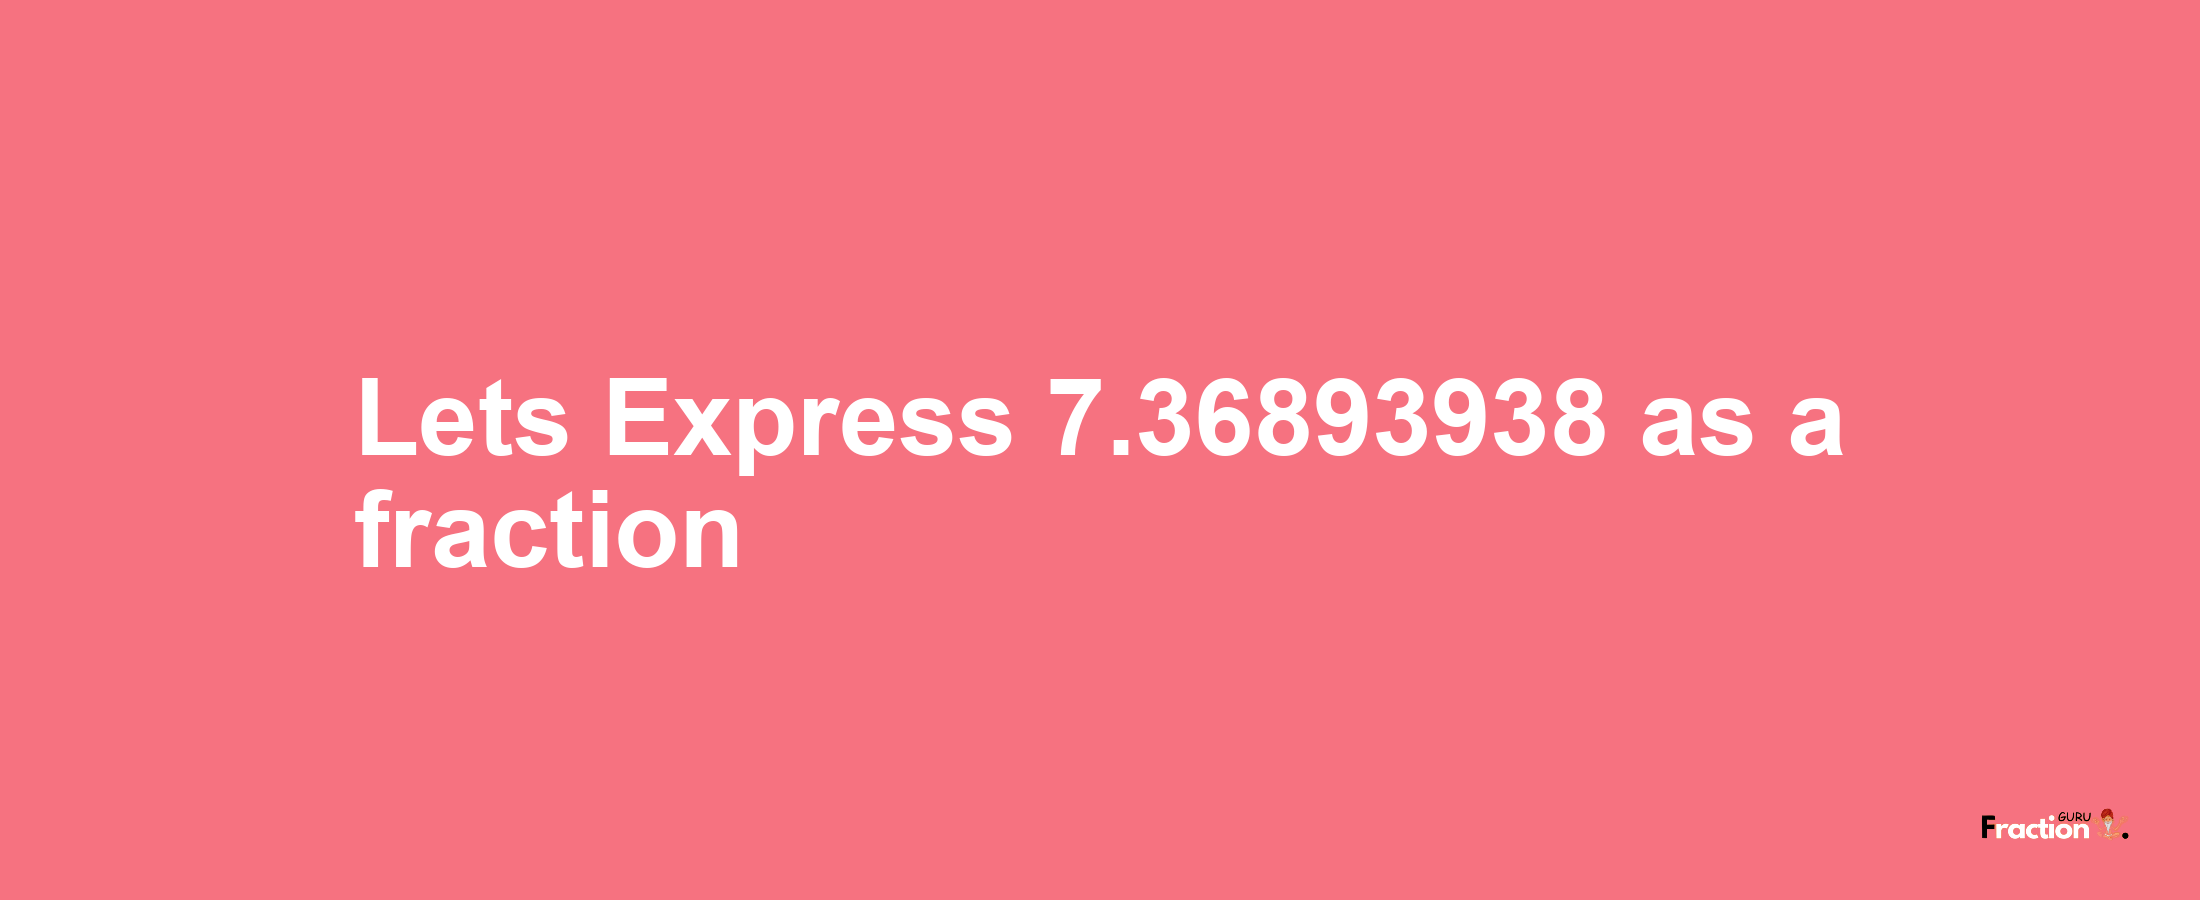 Lets Express 7.36893938 as afraction